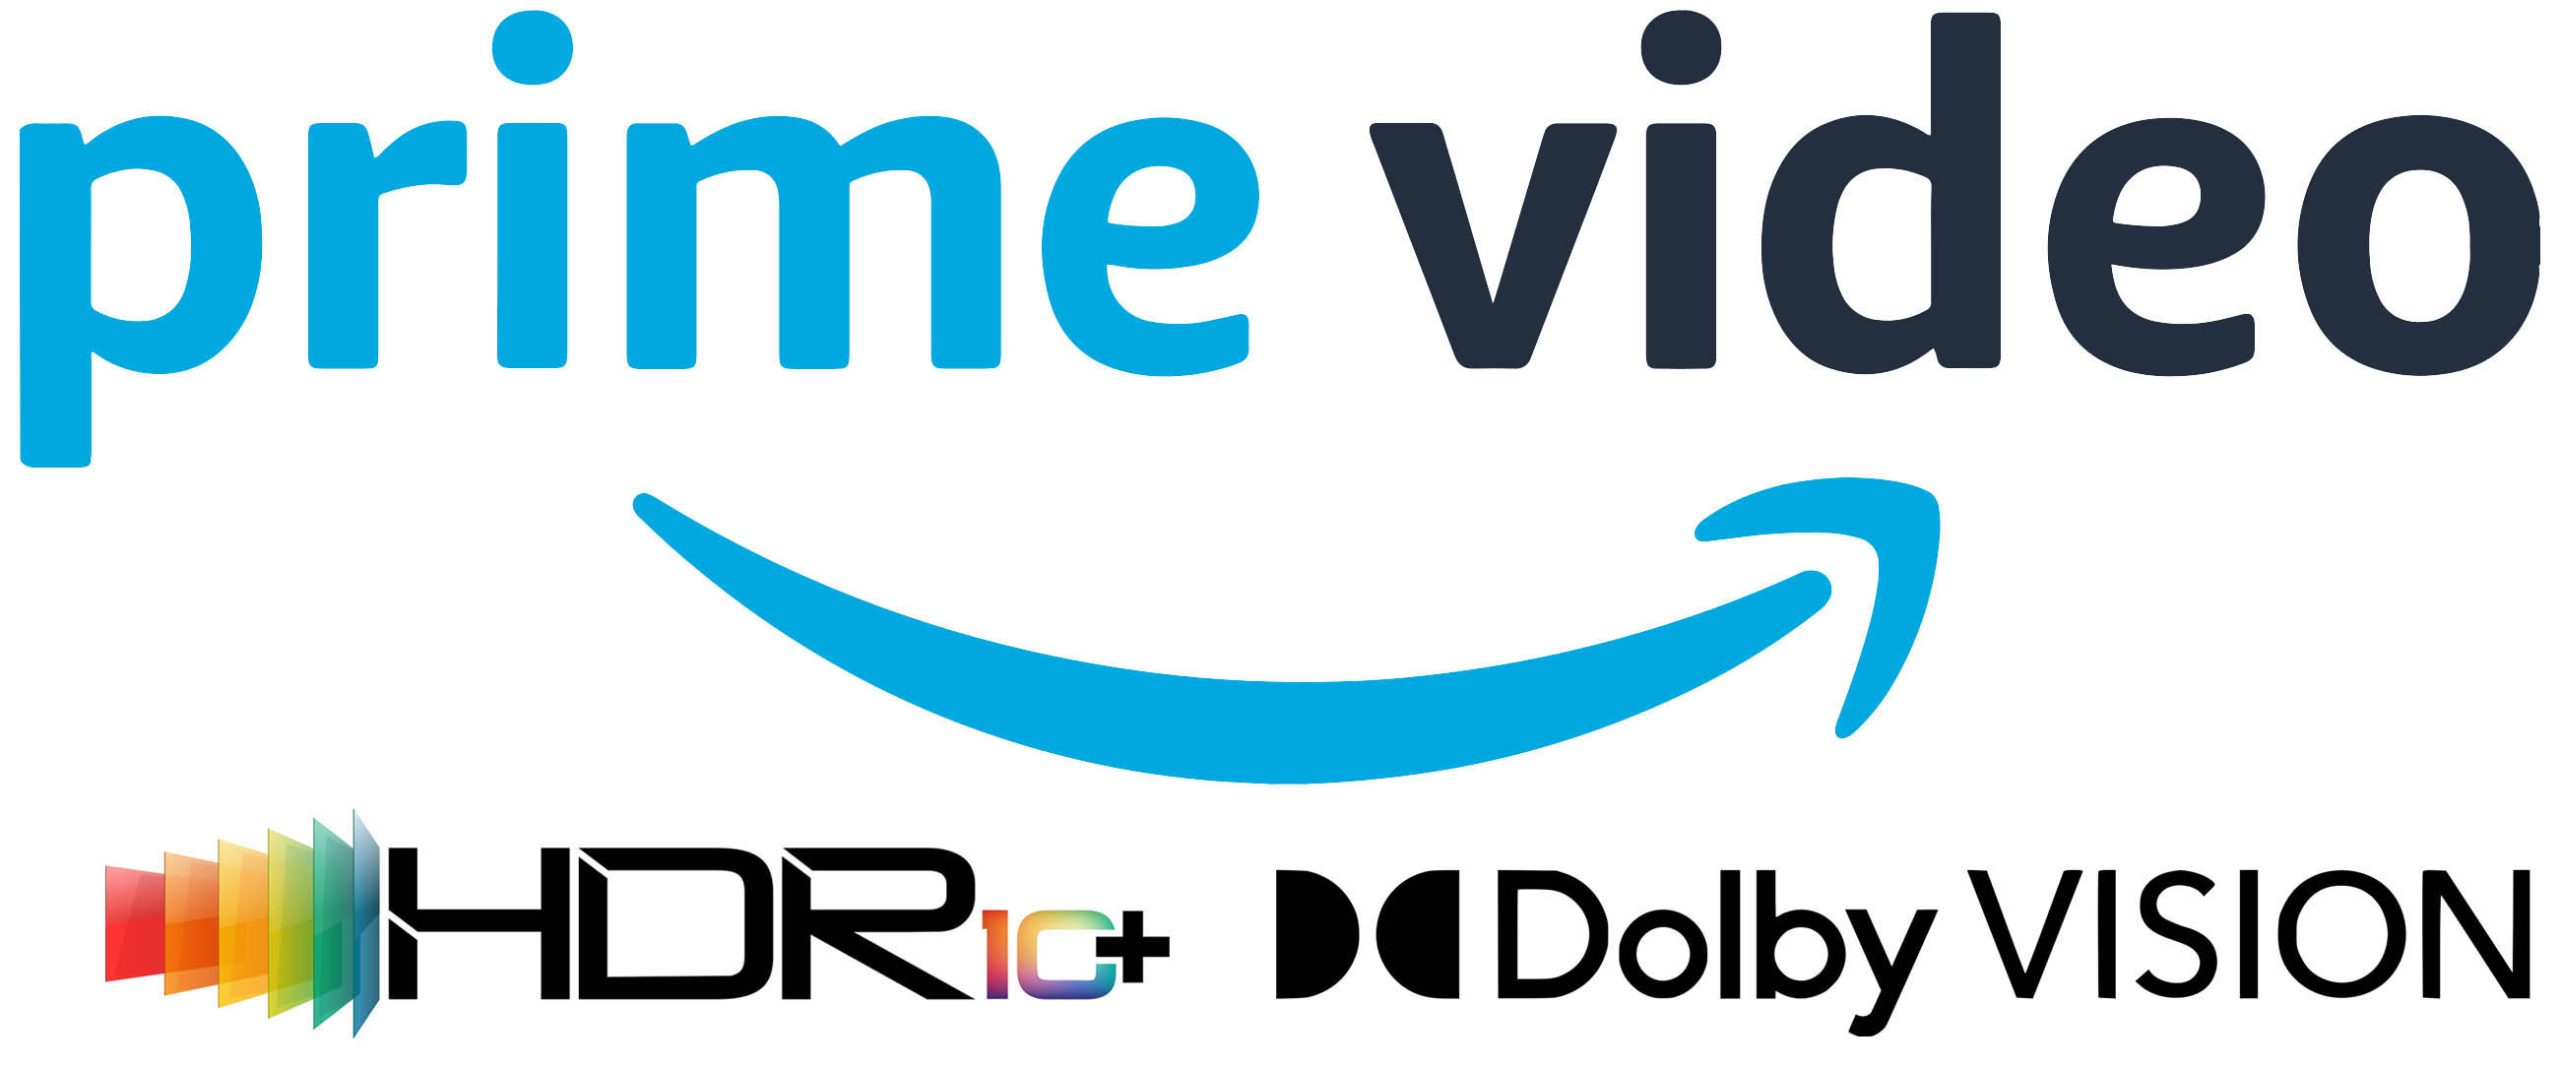 prime video dolby vision hdr 10 plus logos